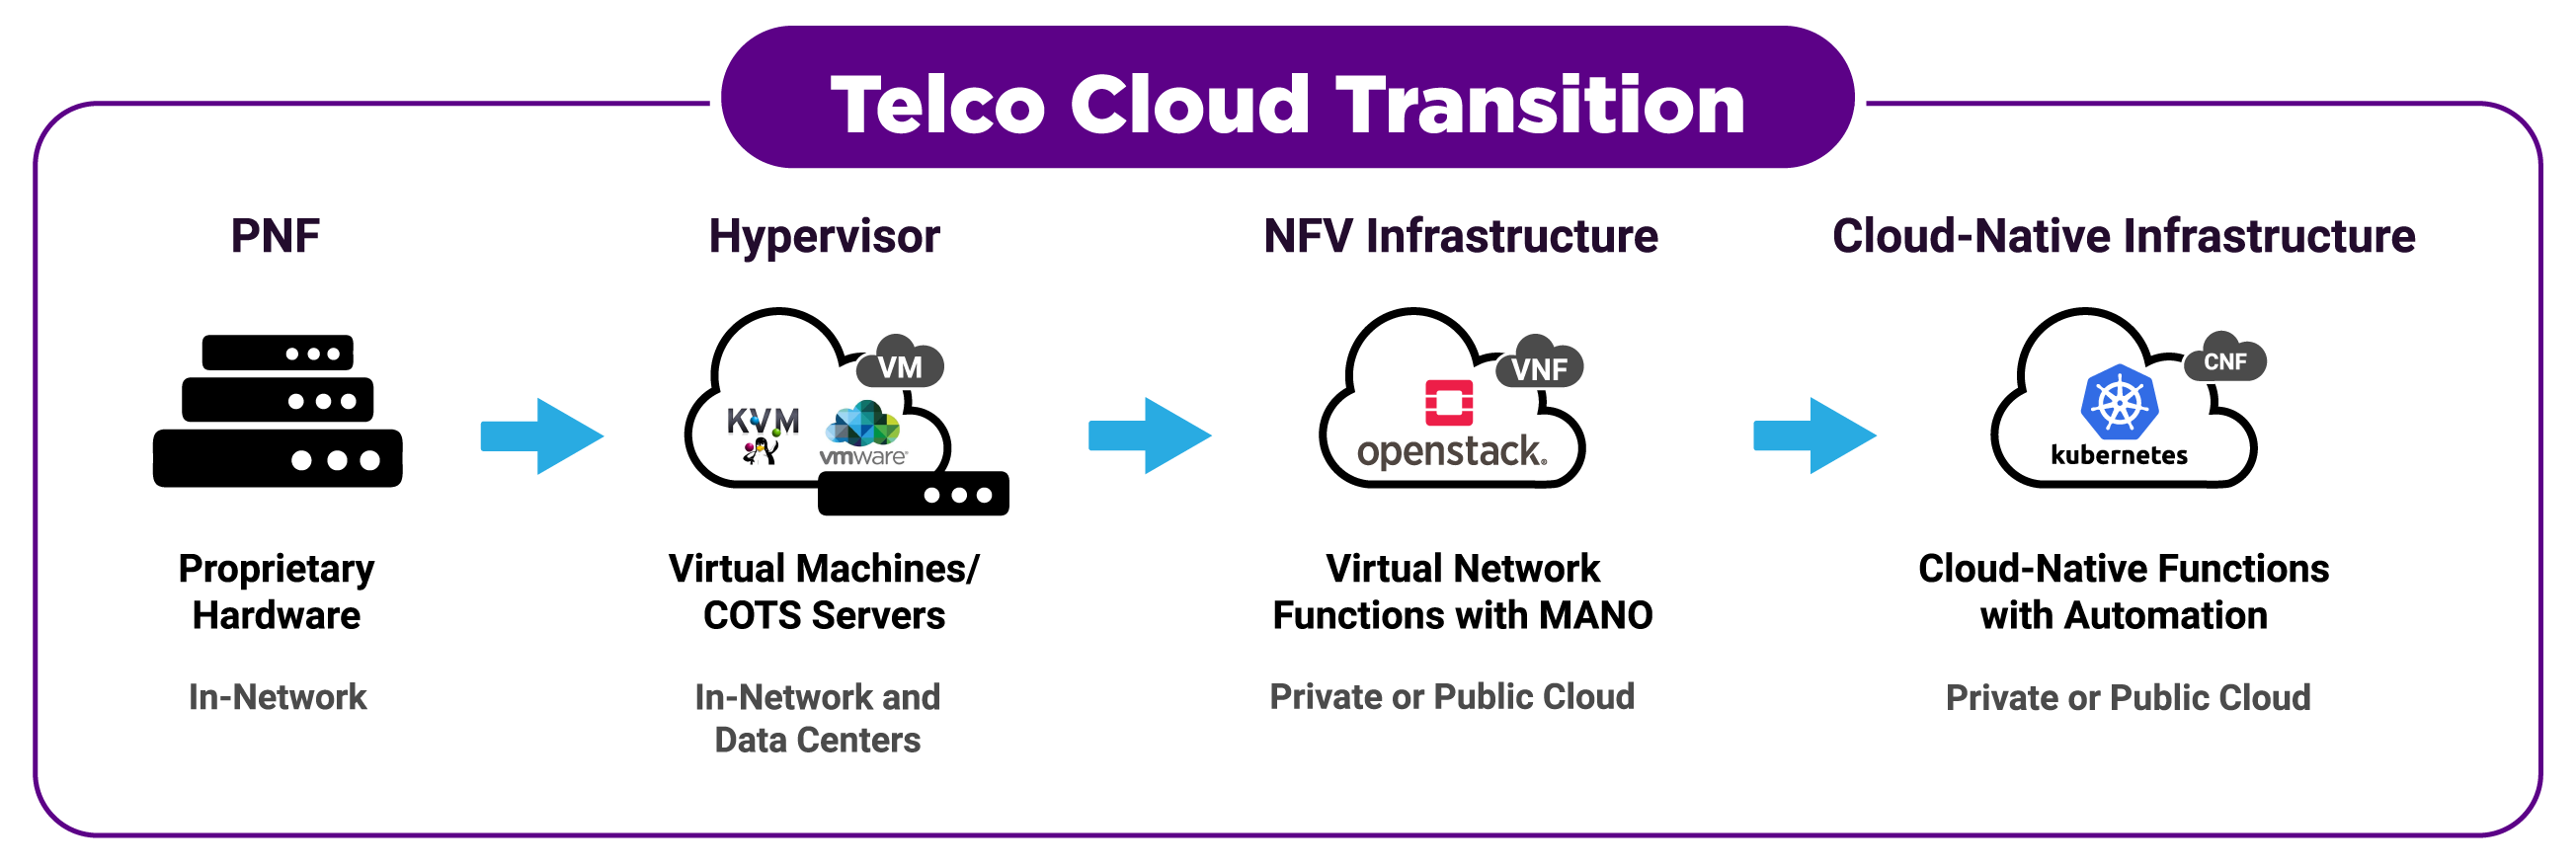 Telco Cloud Transition